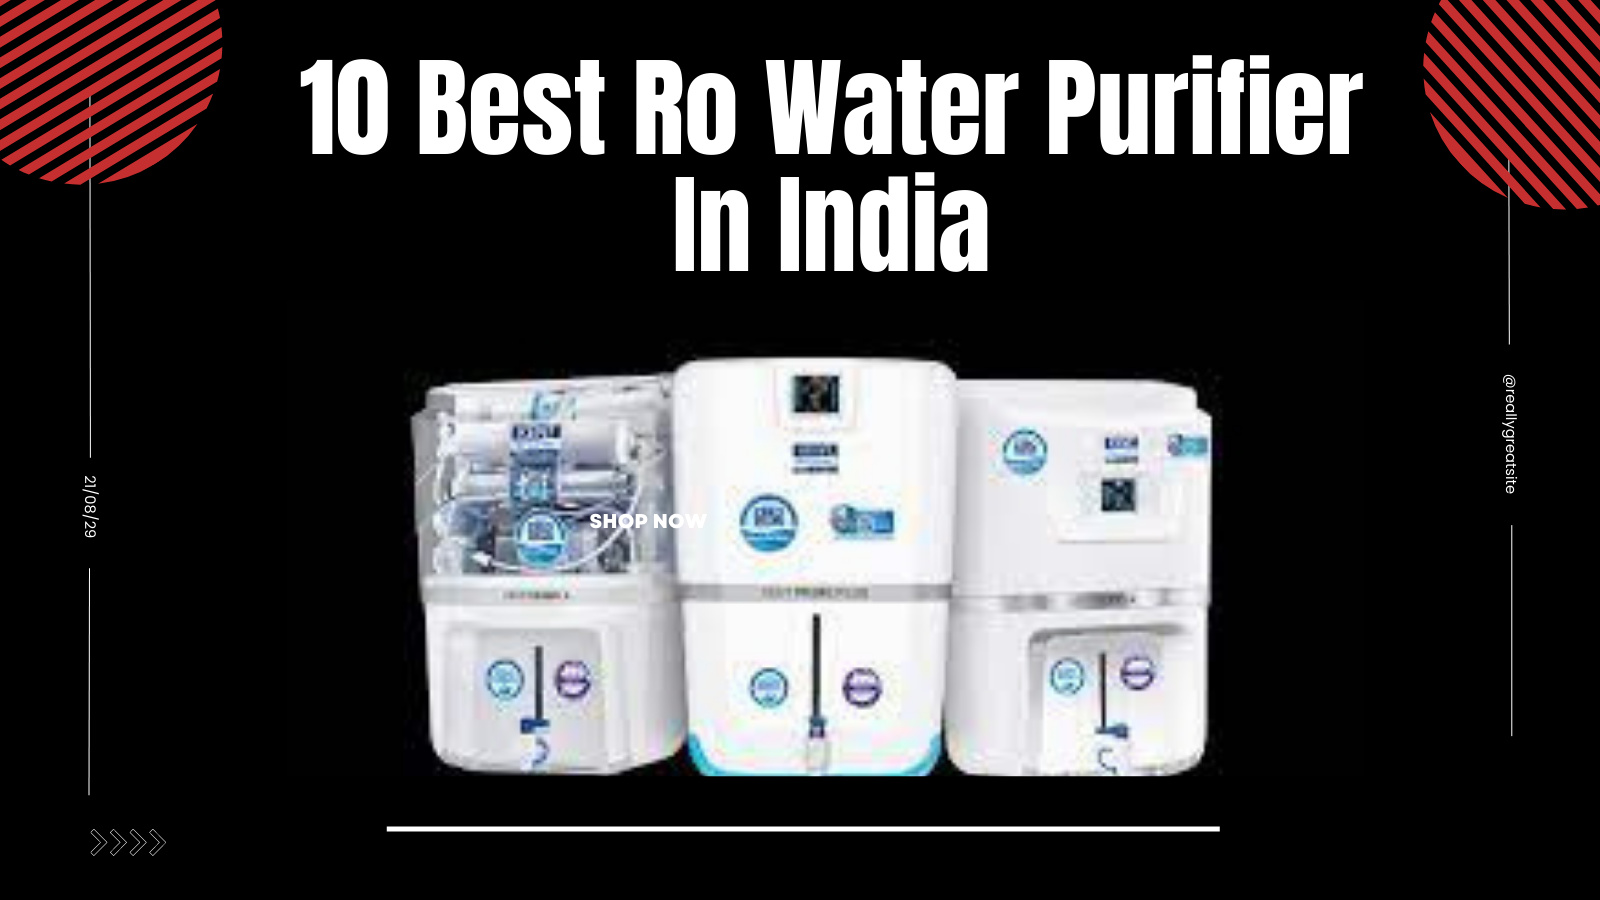 10 best Ro water purifier in india